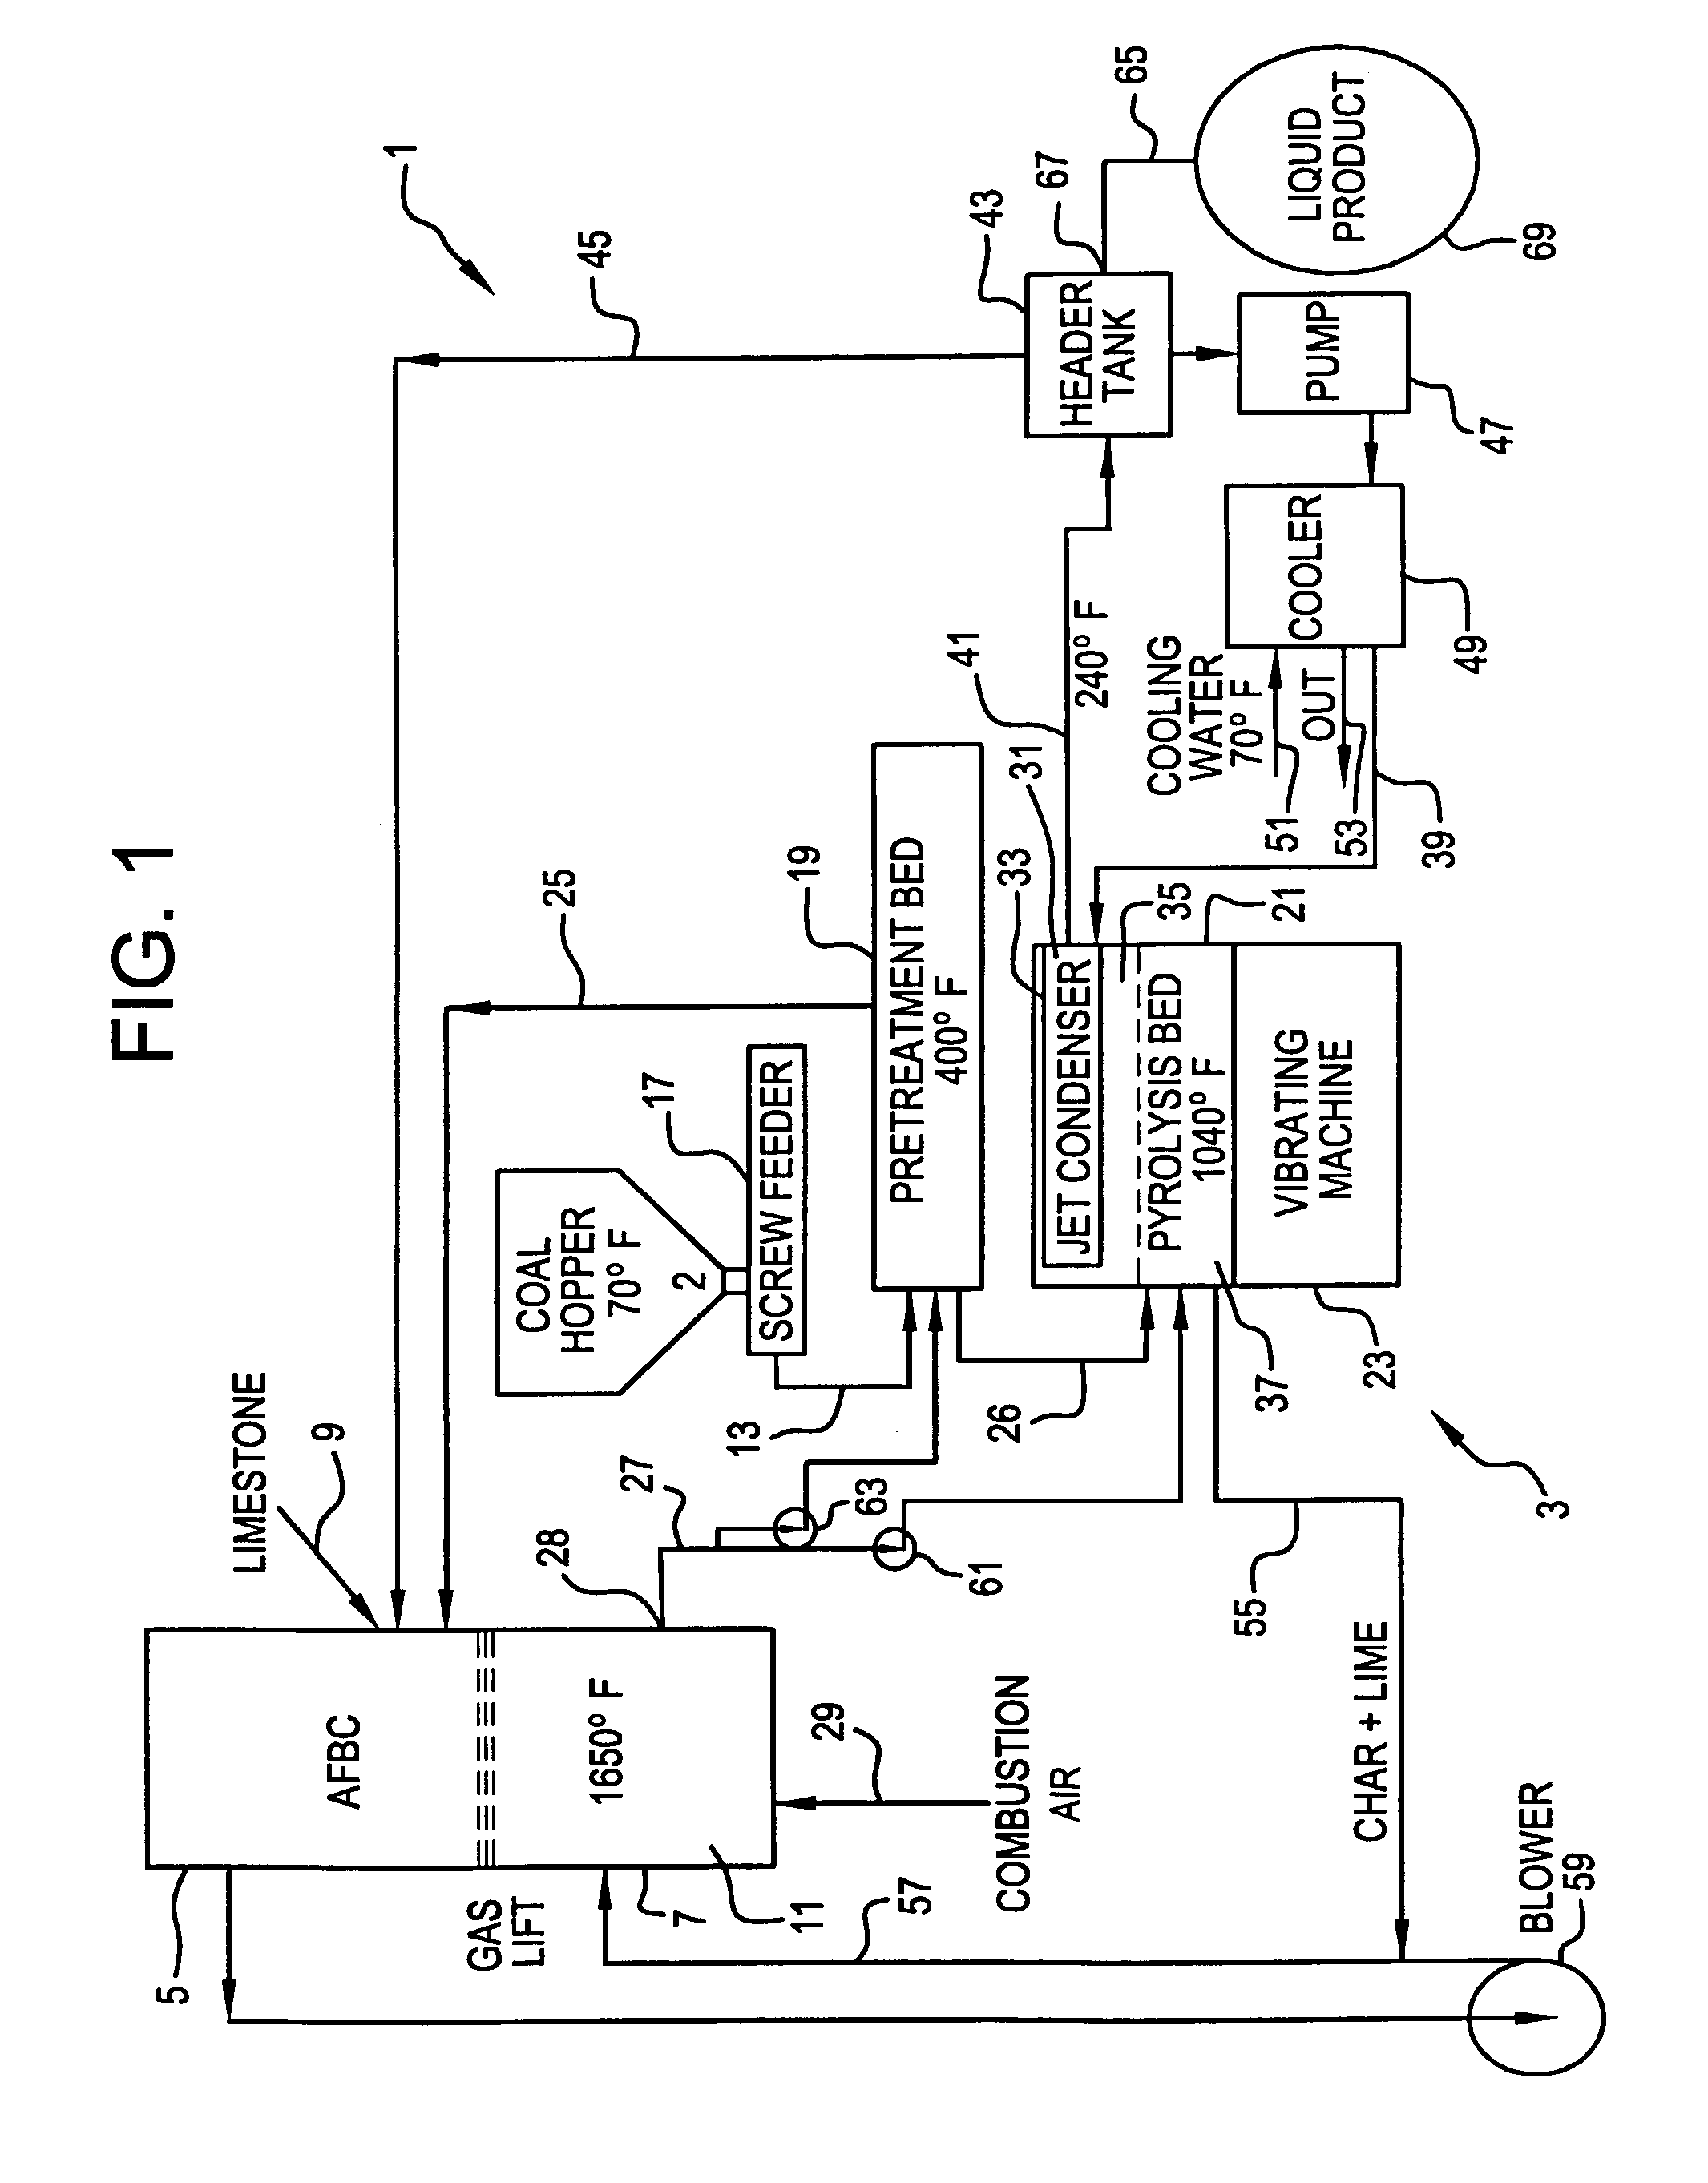 Pretreatment process to remove oxygen from coal en route to a coal pyolysis process as a means of improving the quality of the hydrocarbon liquid product